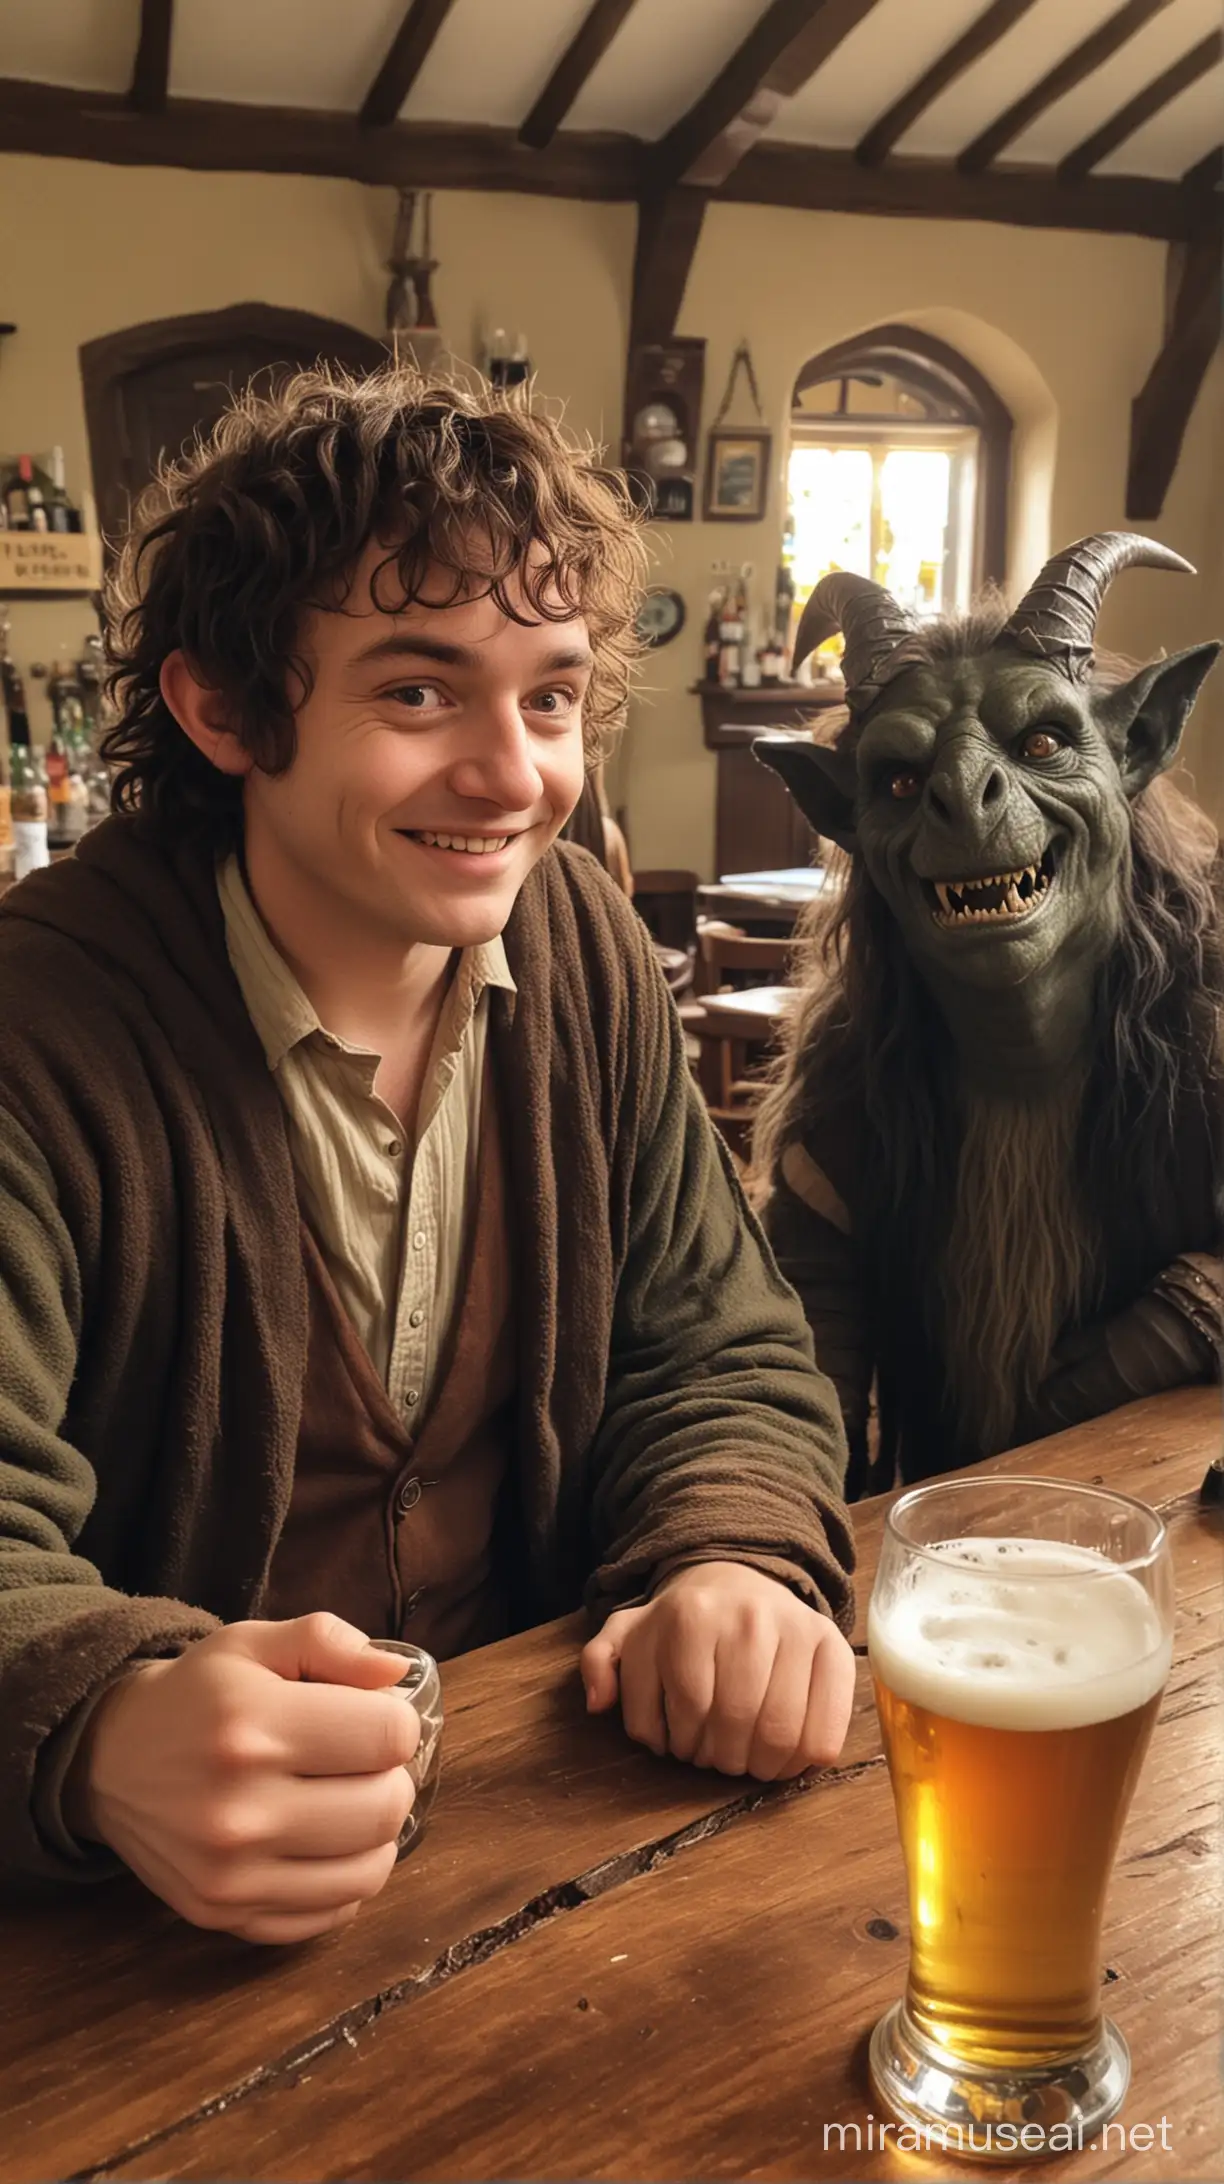 Frodo having a great time with Sauron, as best friends and drinking beer at the pub in The Shire. 